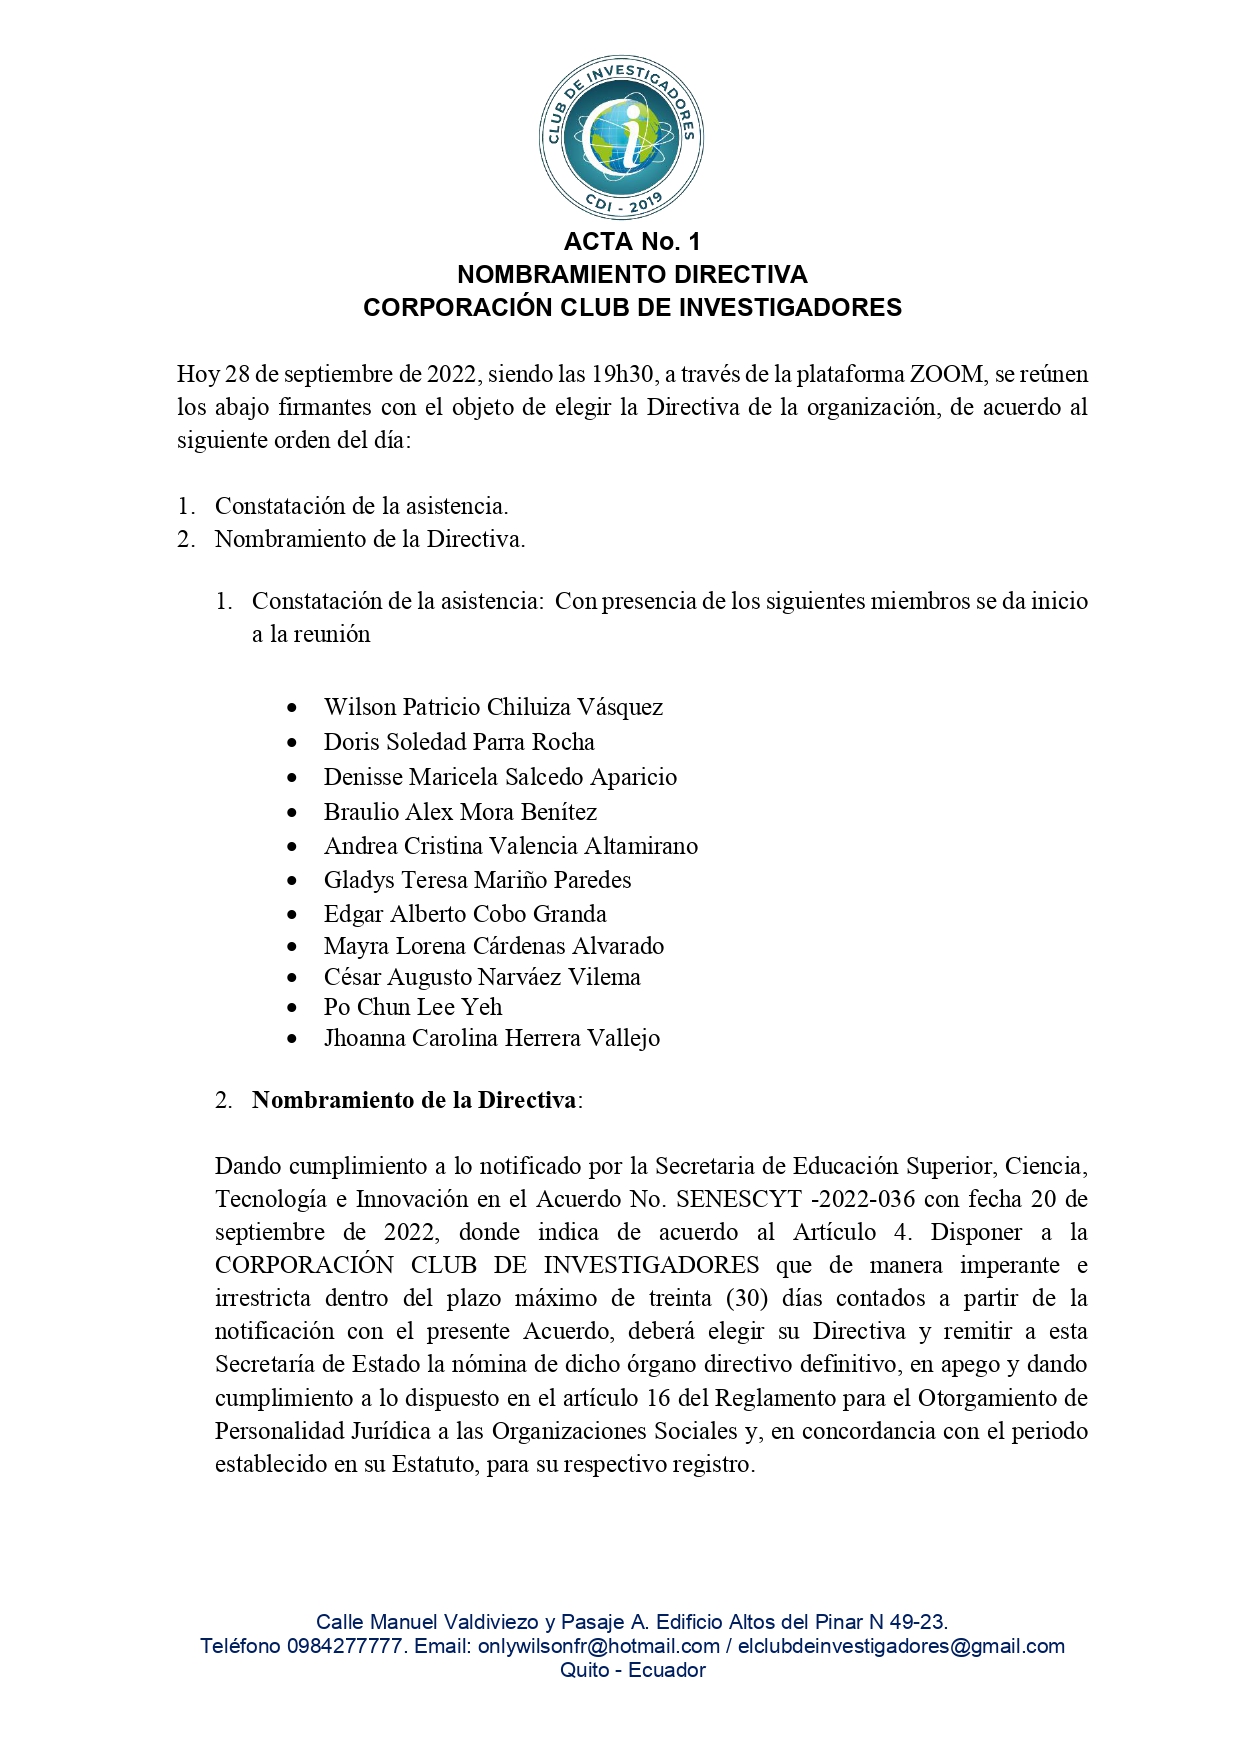 Acta Nombramiento directiva 10-06-22-signed -signed-signed_page-0001